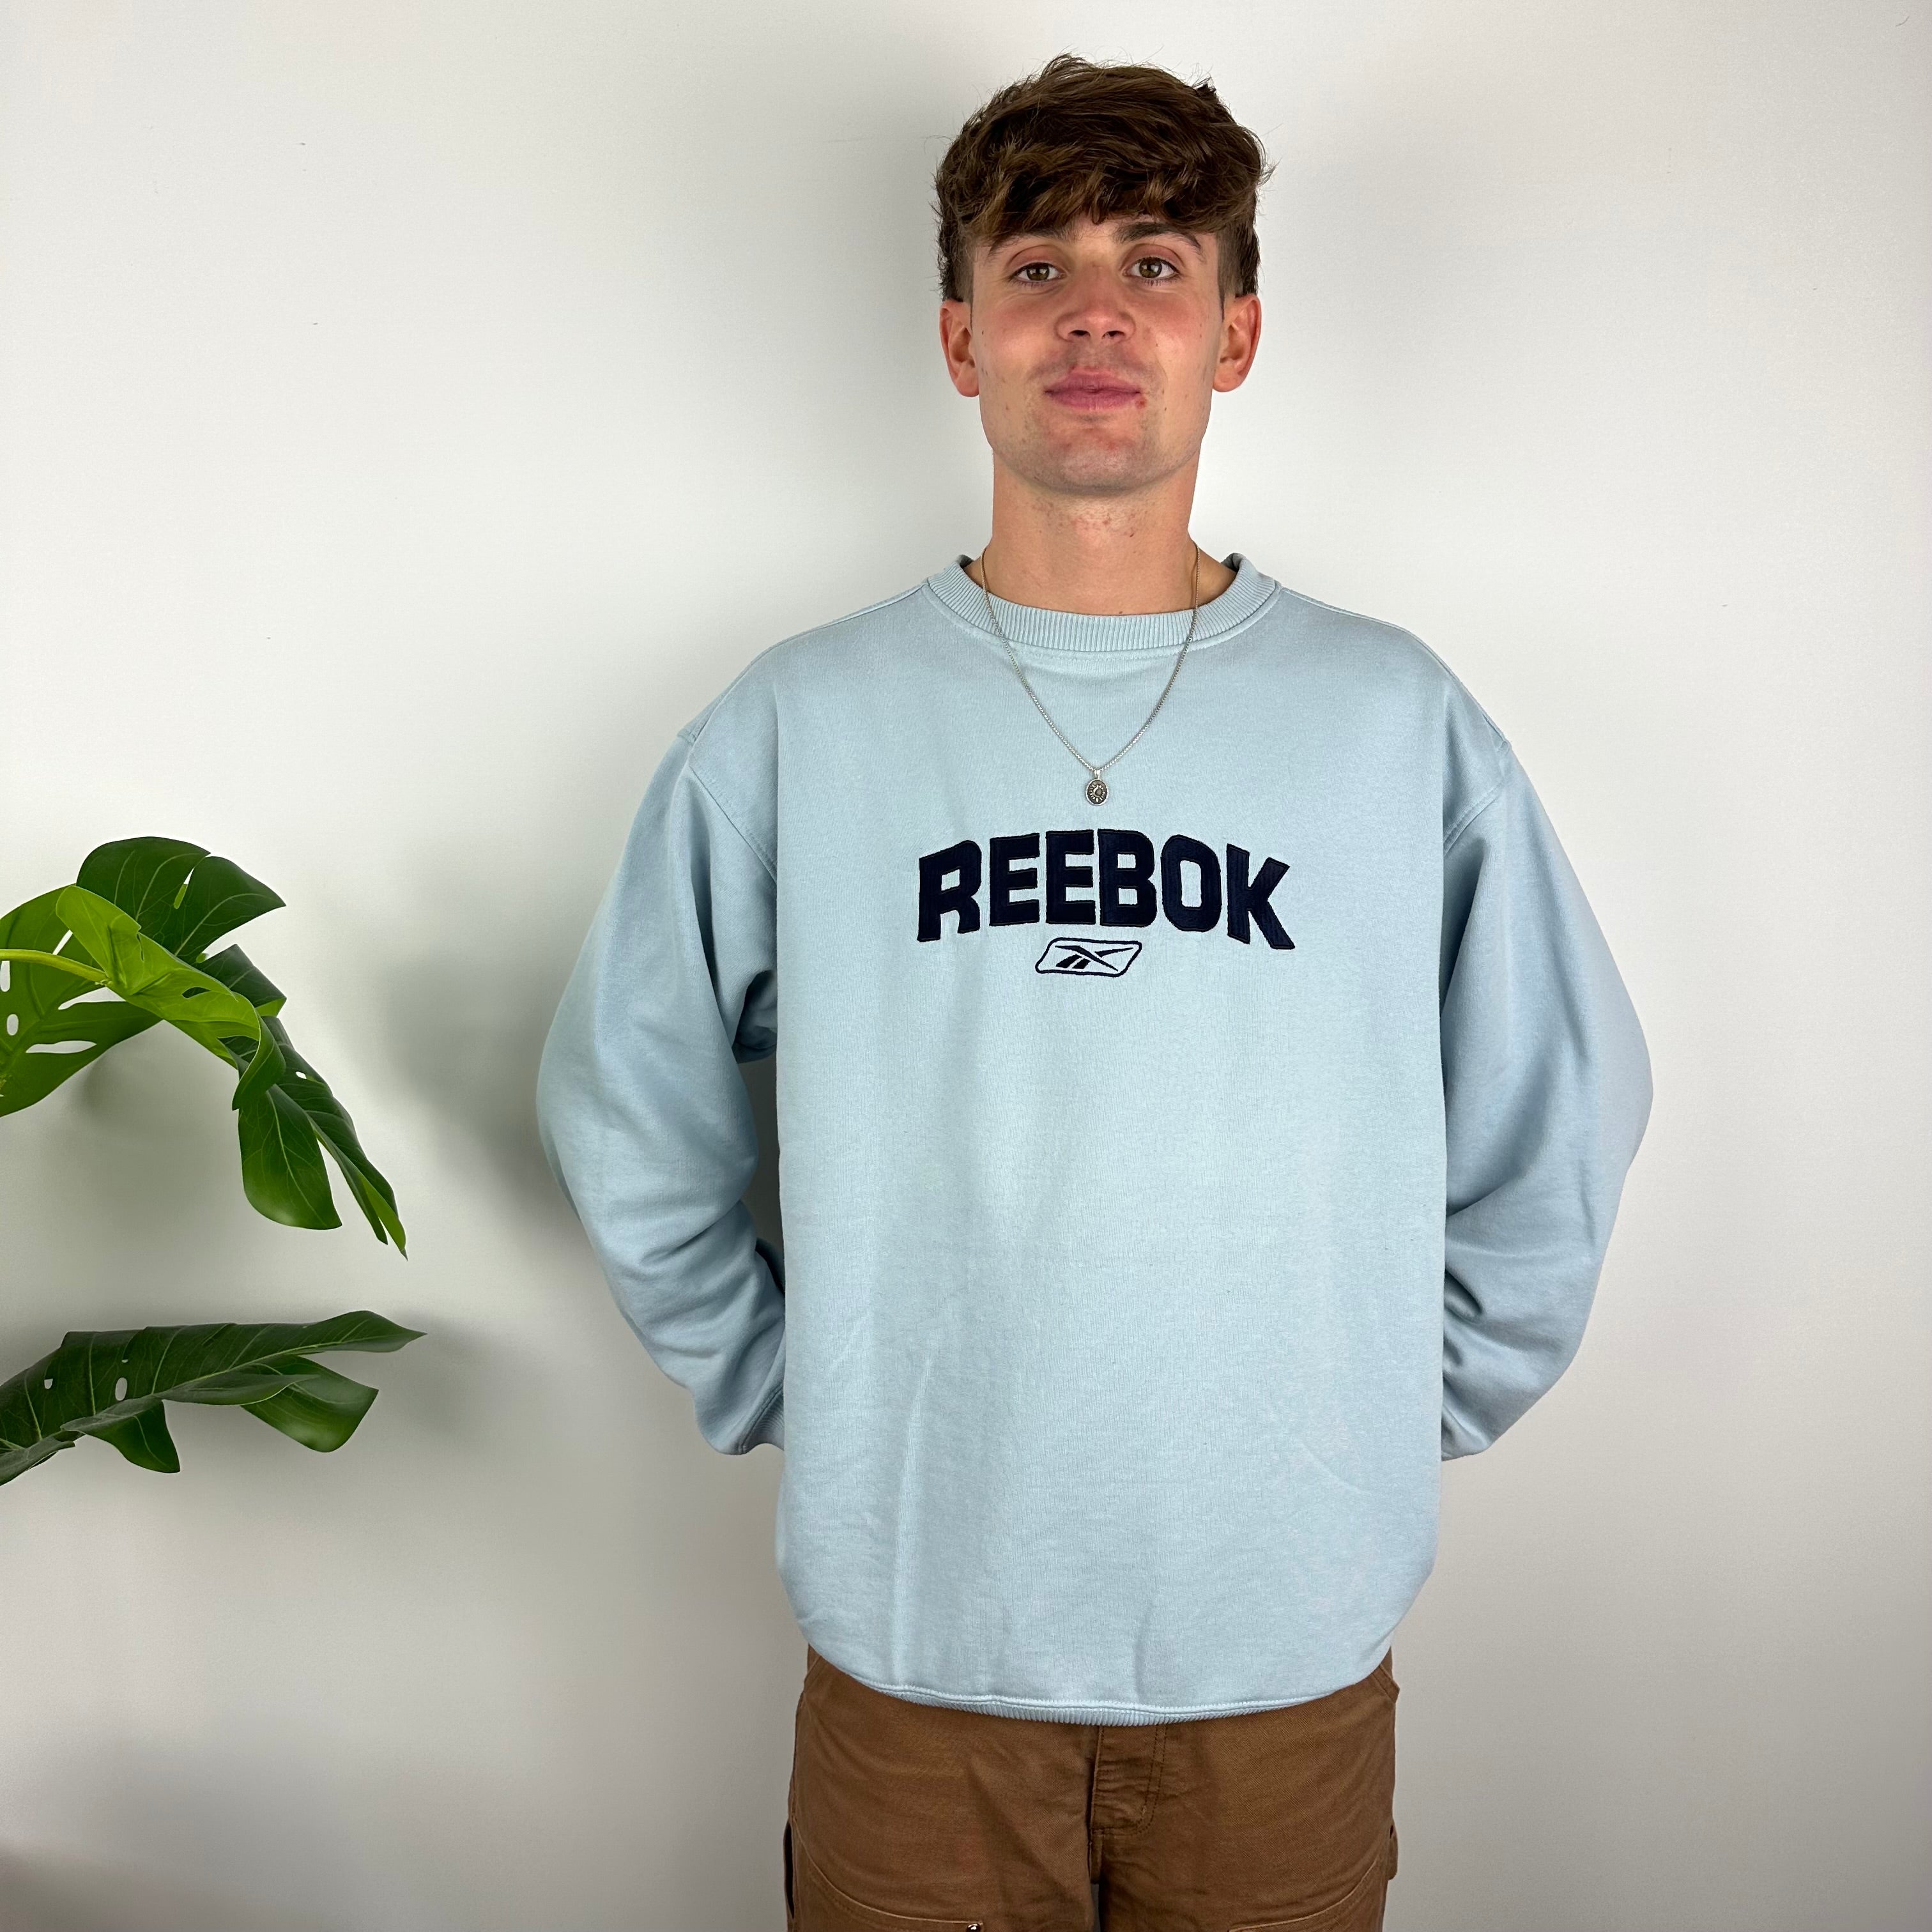 Reebok RARE Baby Blue Embroidered Spell Out Sweatshirt (XL)